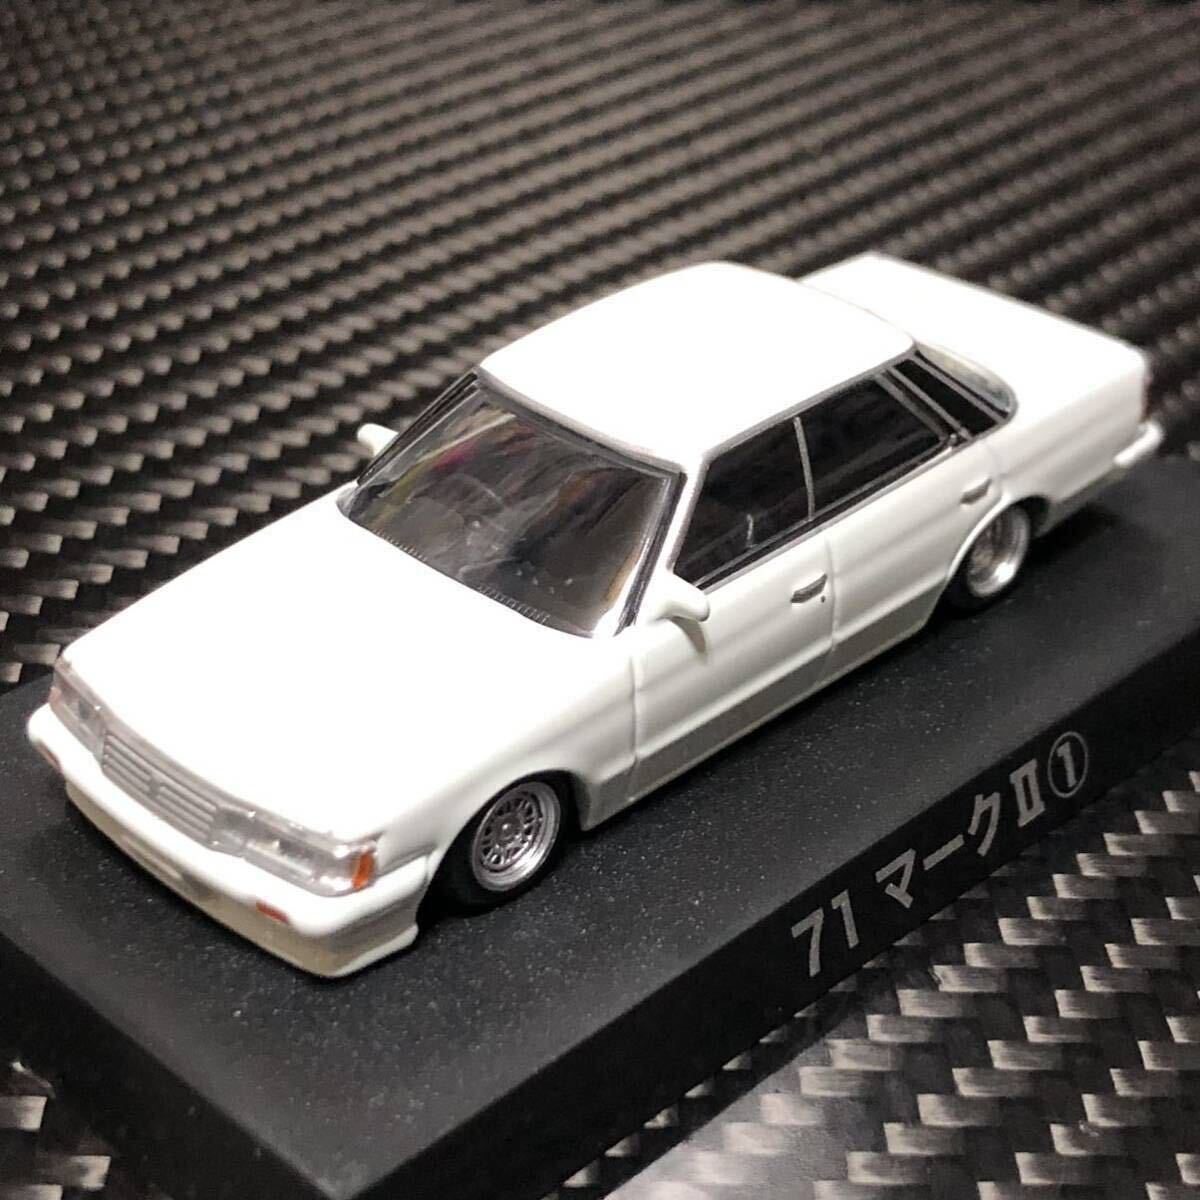 1/64gla tea n collection no. 15.71 Mark Ⅱ ① Blister unopened prompt decision equipped 1987 year GX71 vehicle height short 